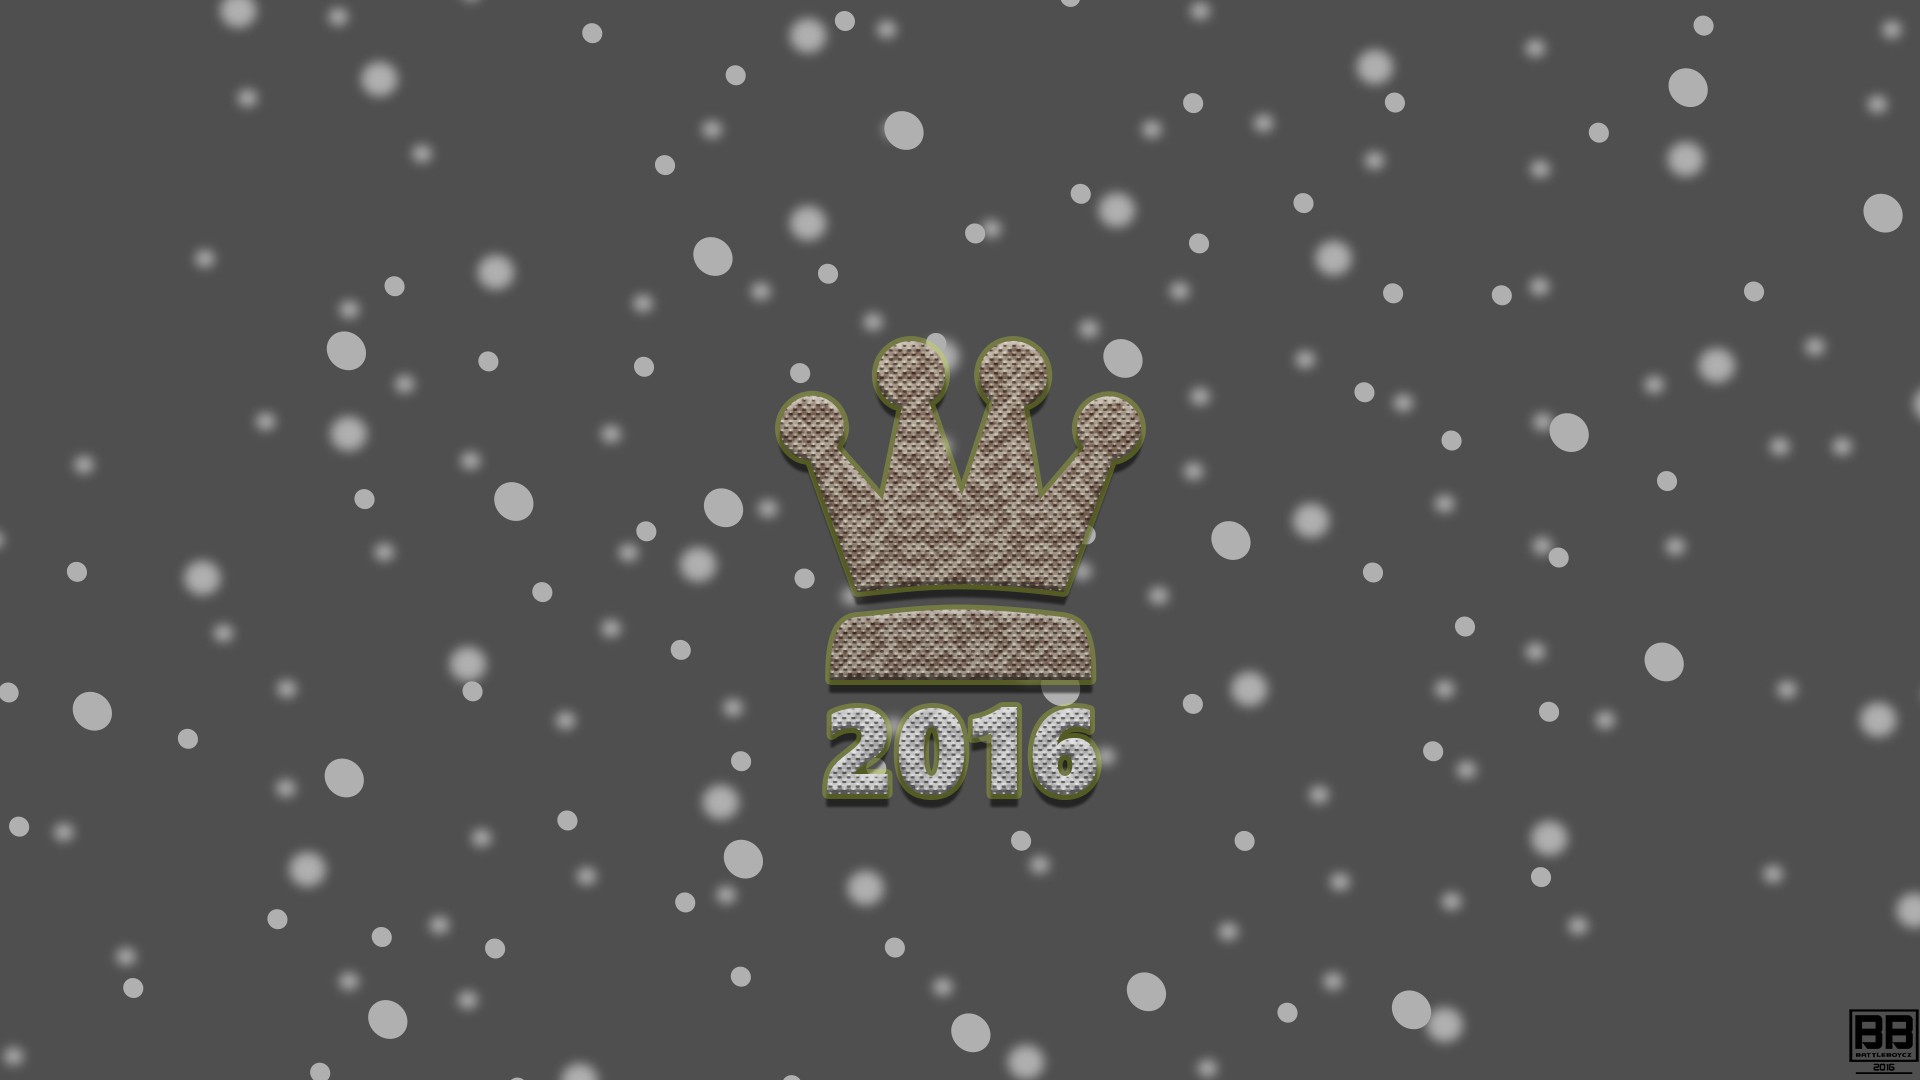 General 1920x1080 king graphic design typography New Year crown gray background 2016 (year) numbers digital art watermarked snowflakes minimalism snow